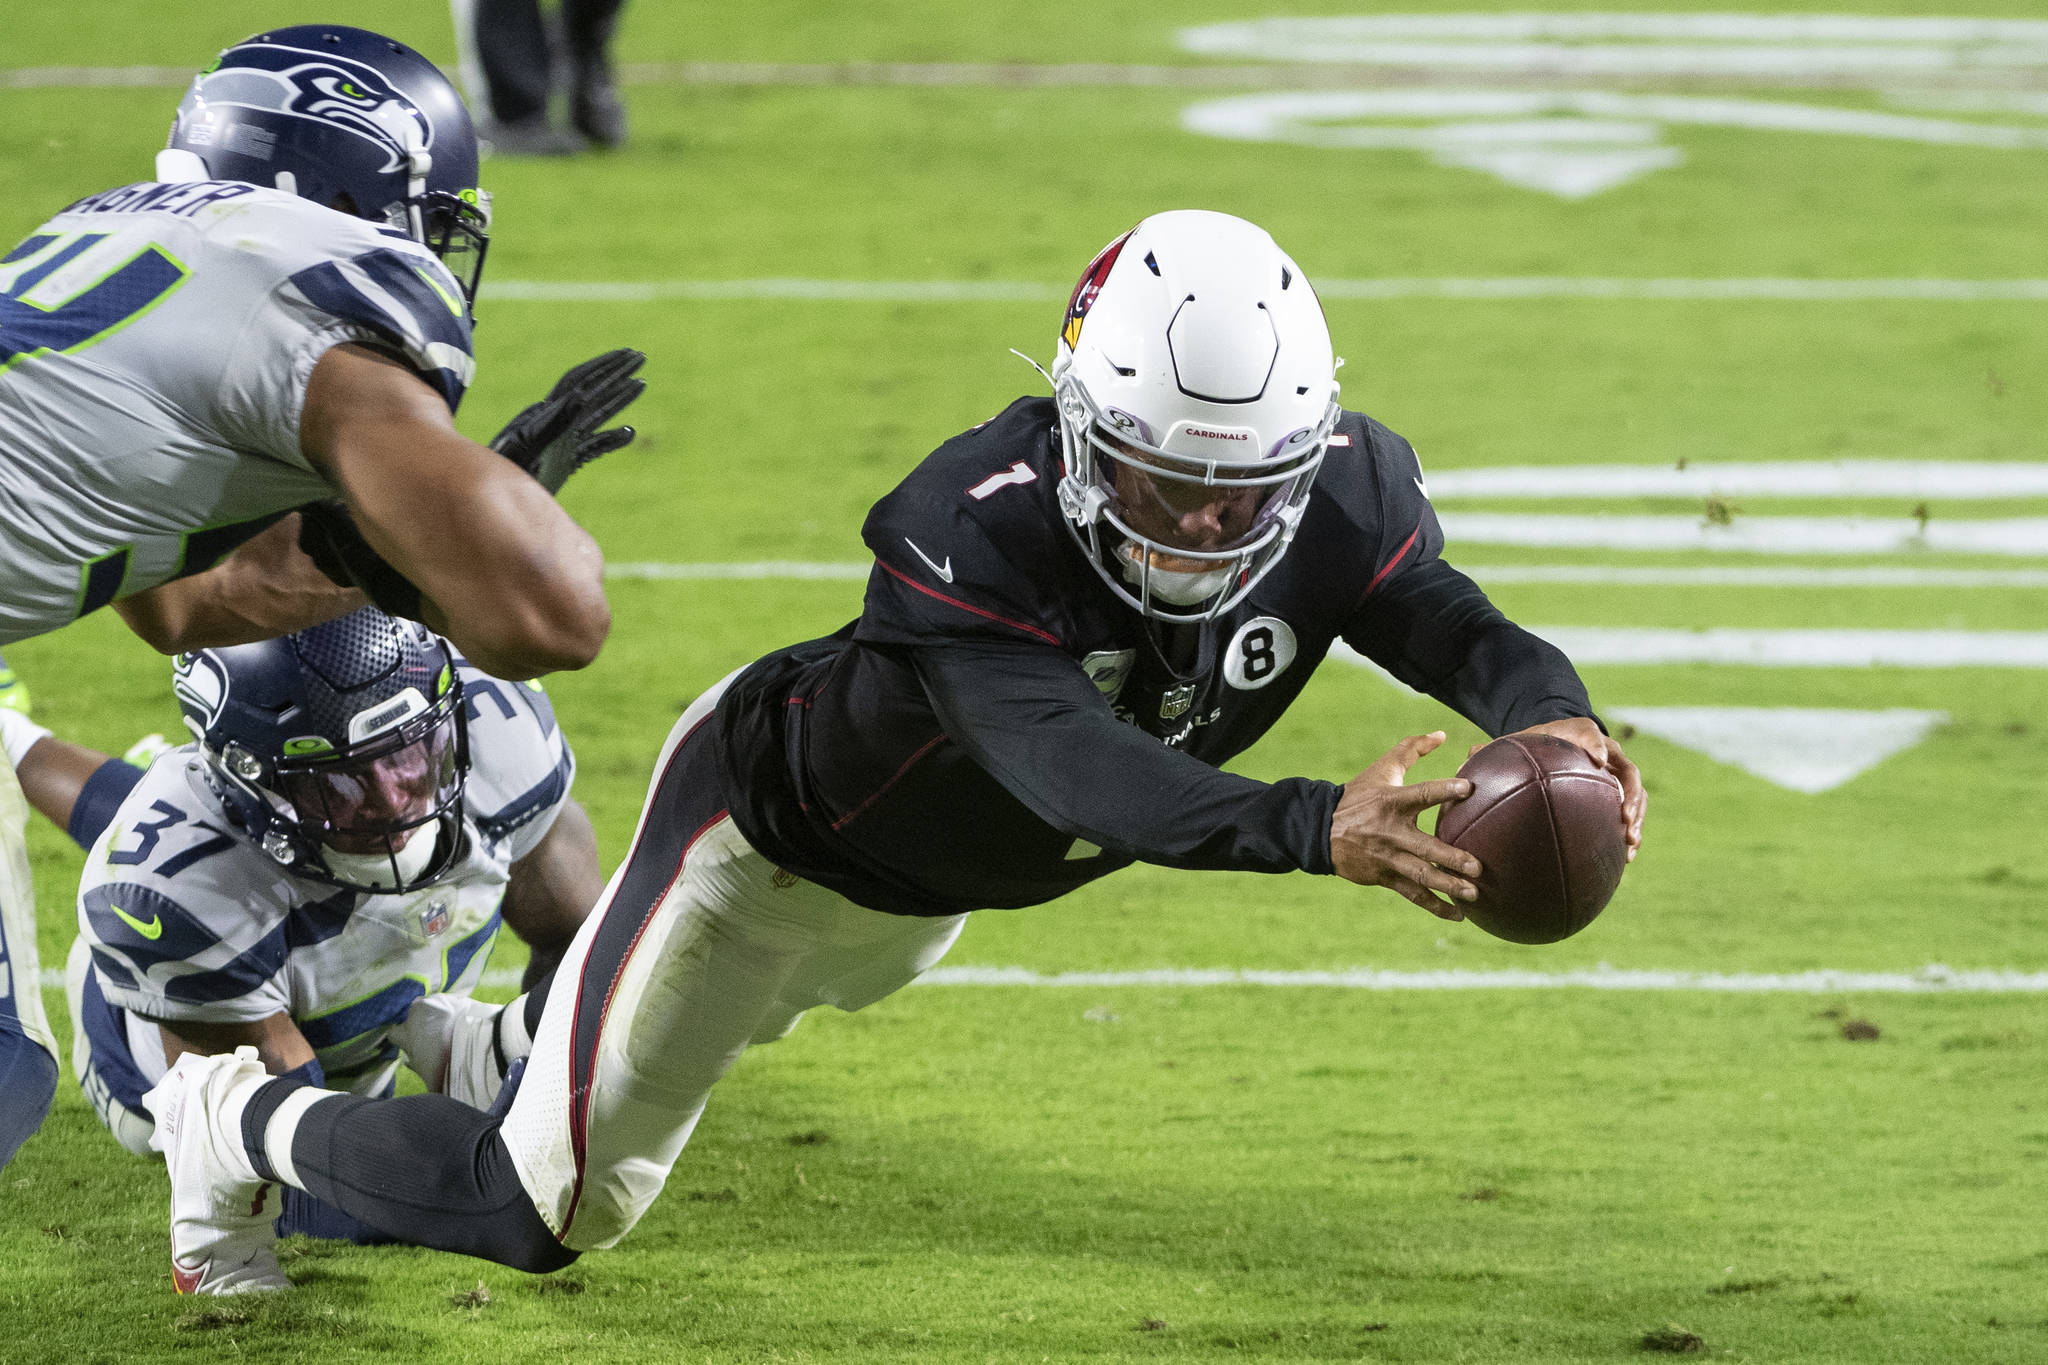 Arizona Cardinals quarterback Kyler Murray (1) dives in for a touchdown against Seattle Seahawks free safety Quandre Diggs (37) during last Sunday’s game in Glendale, Ariz. The Arizona Cardinals won in overtime. (AP Photo/Jennifer Stewart)